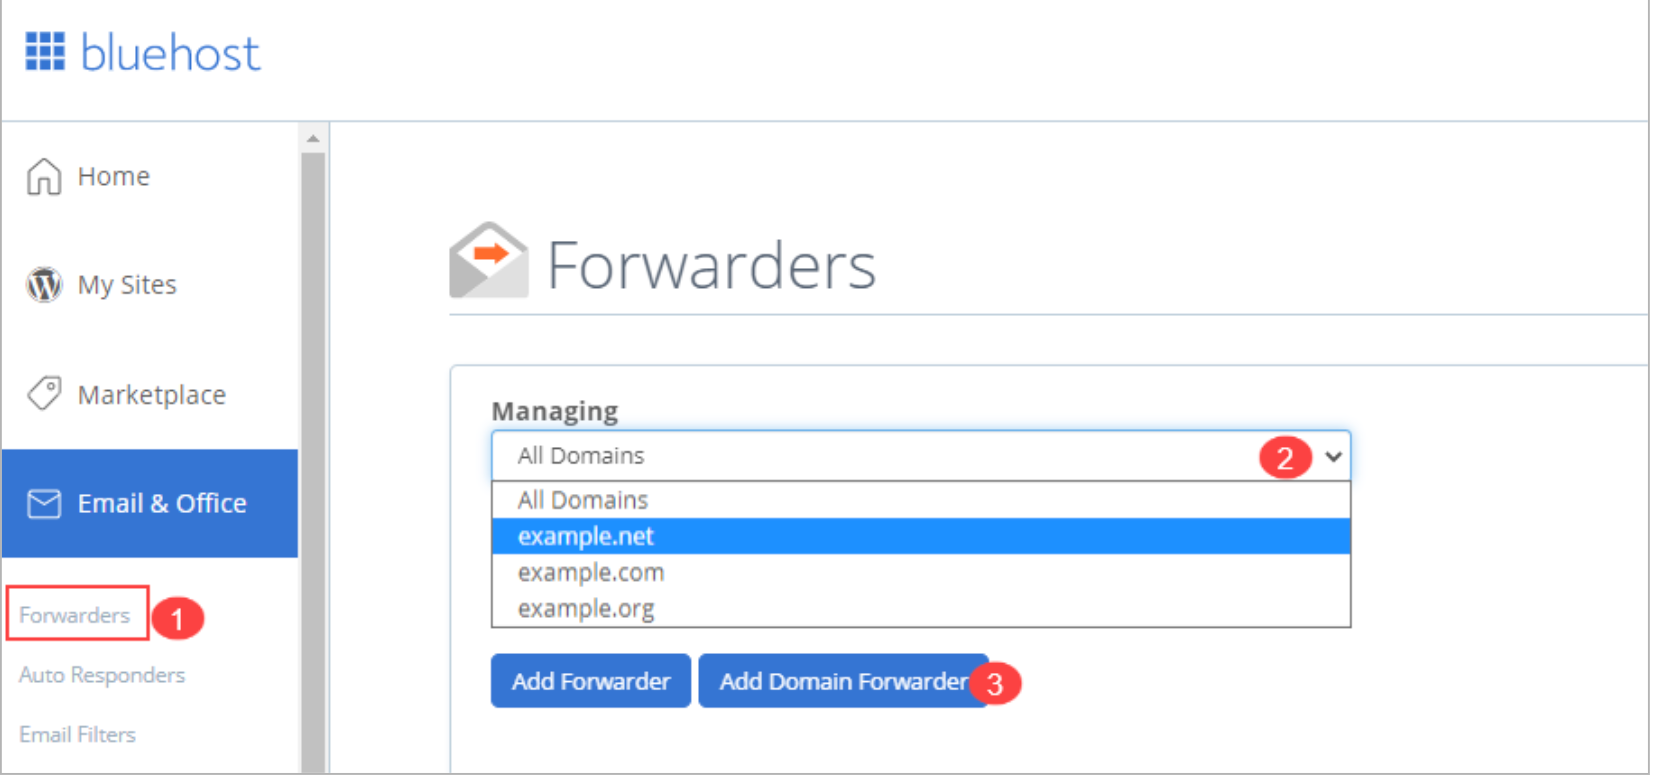 webmail-email-and-office-forwarders